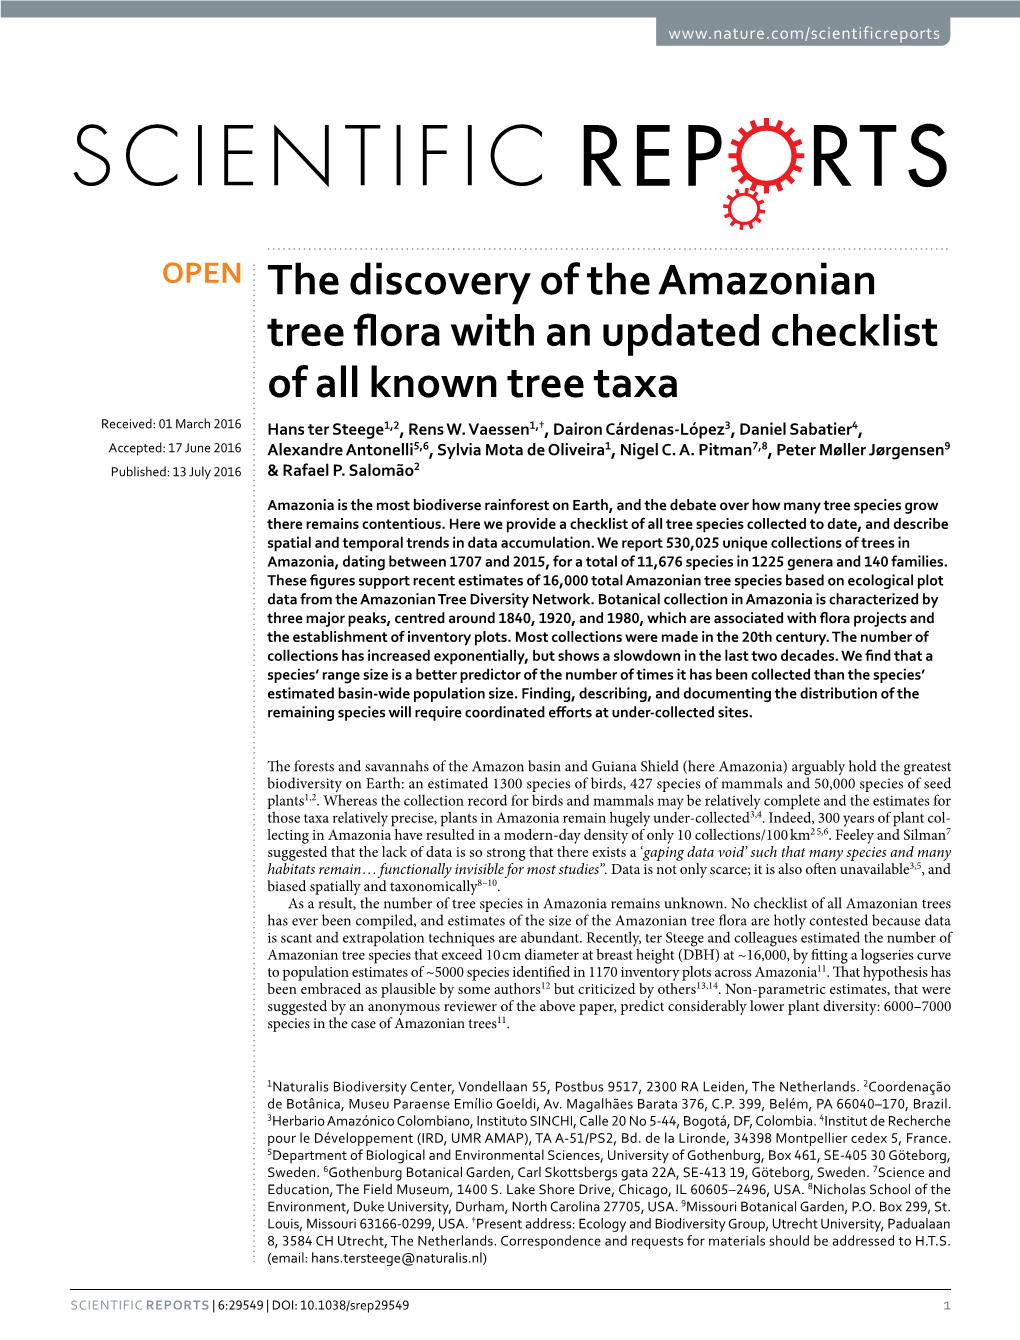 The Discovery of the Amazonian Tree Flora with an Updated Checklist of All Known Tree Taxa Received: 01 March 2016 Hans Ter Steege1,2, Rens W